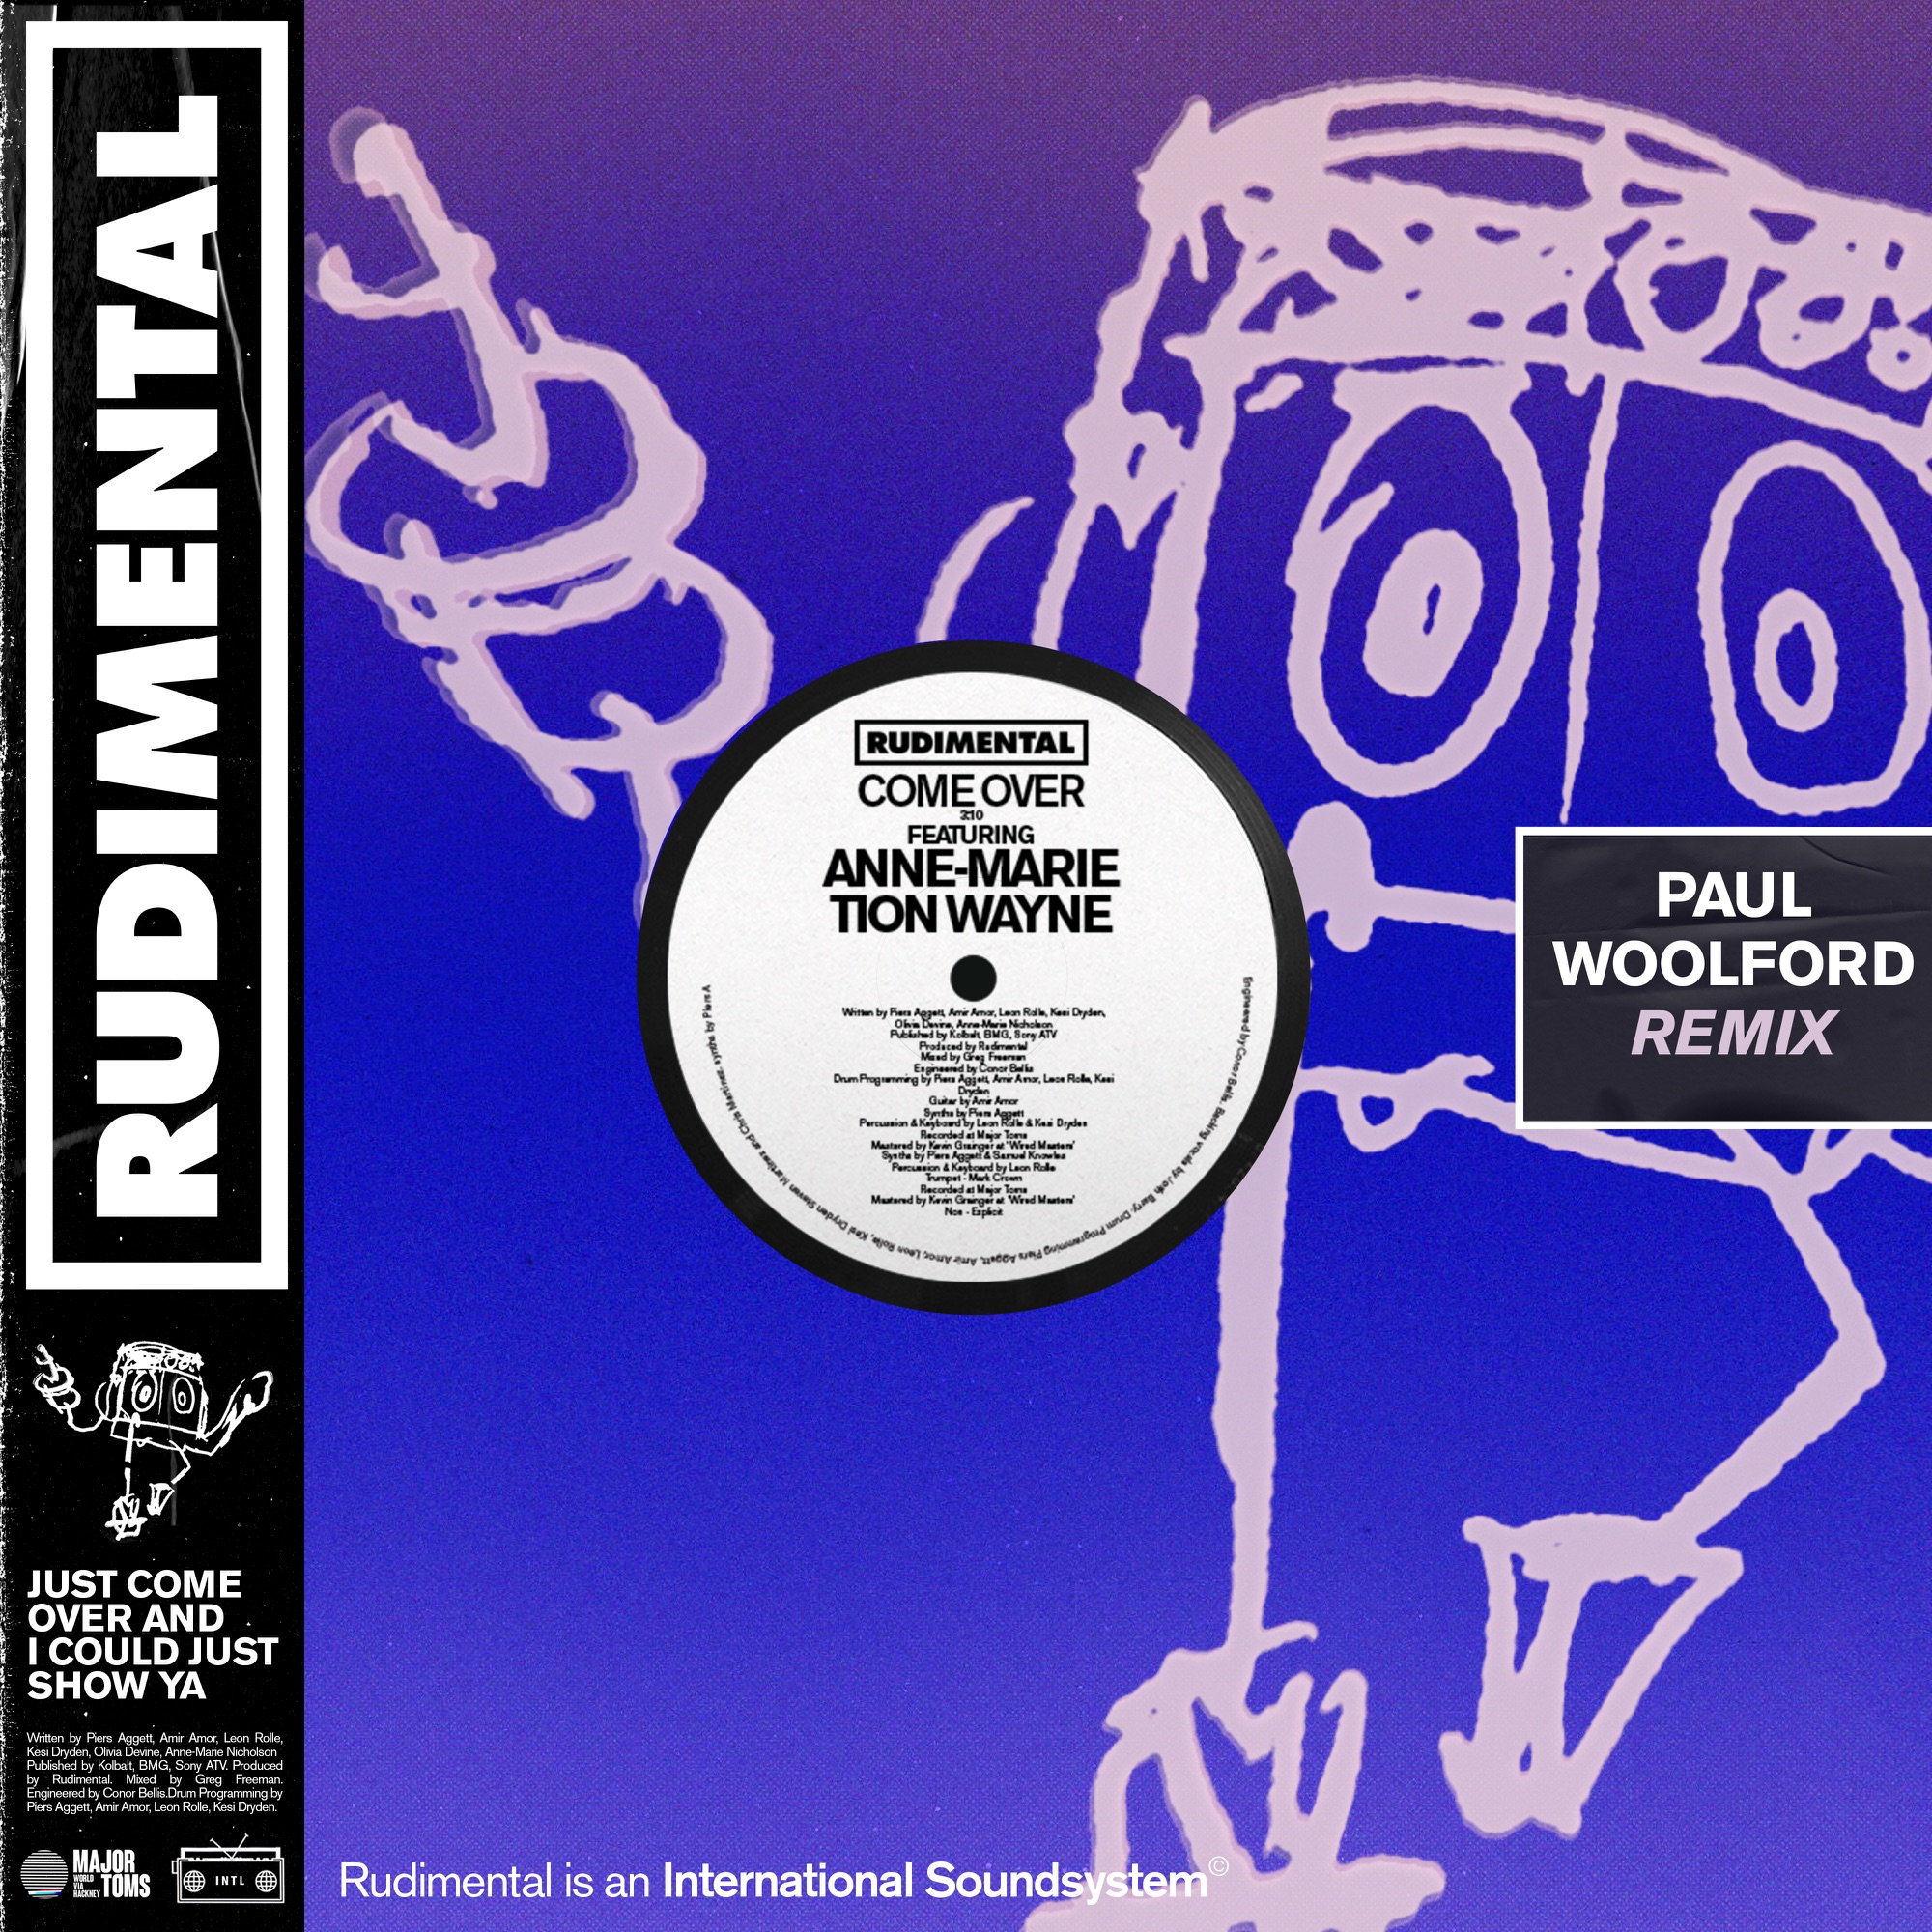 Rudimental - Come Over (feat. Anne-Marie & Tion Wayne) [Paul Woolford Remix] - Single